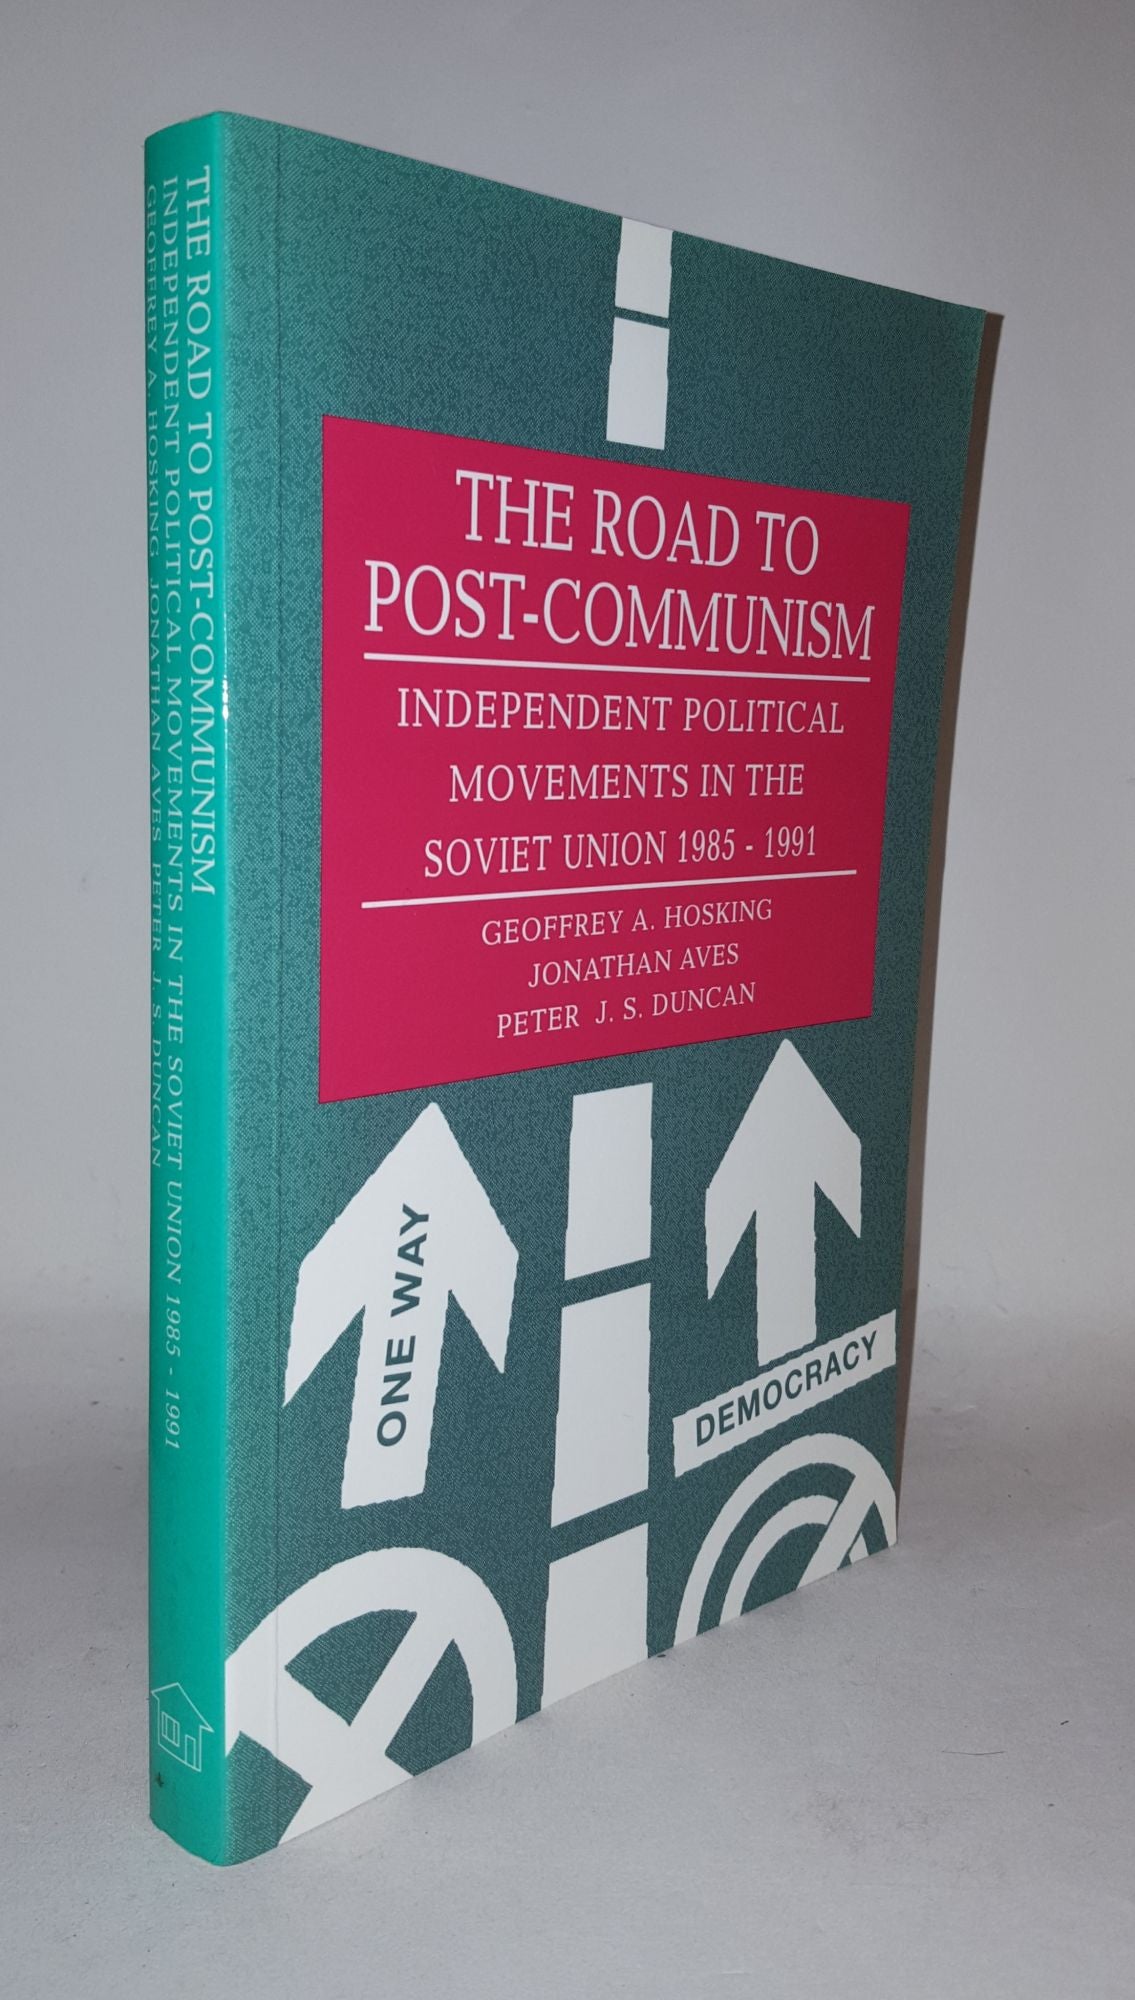 HOSKING Geoffrey A., AVES Jonathan, DUNCAN Peter J.S. - The Road to Post-Communism Independent Political Movements in the Former Soviet Union